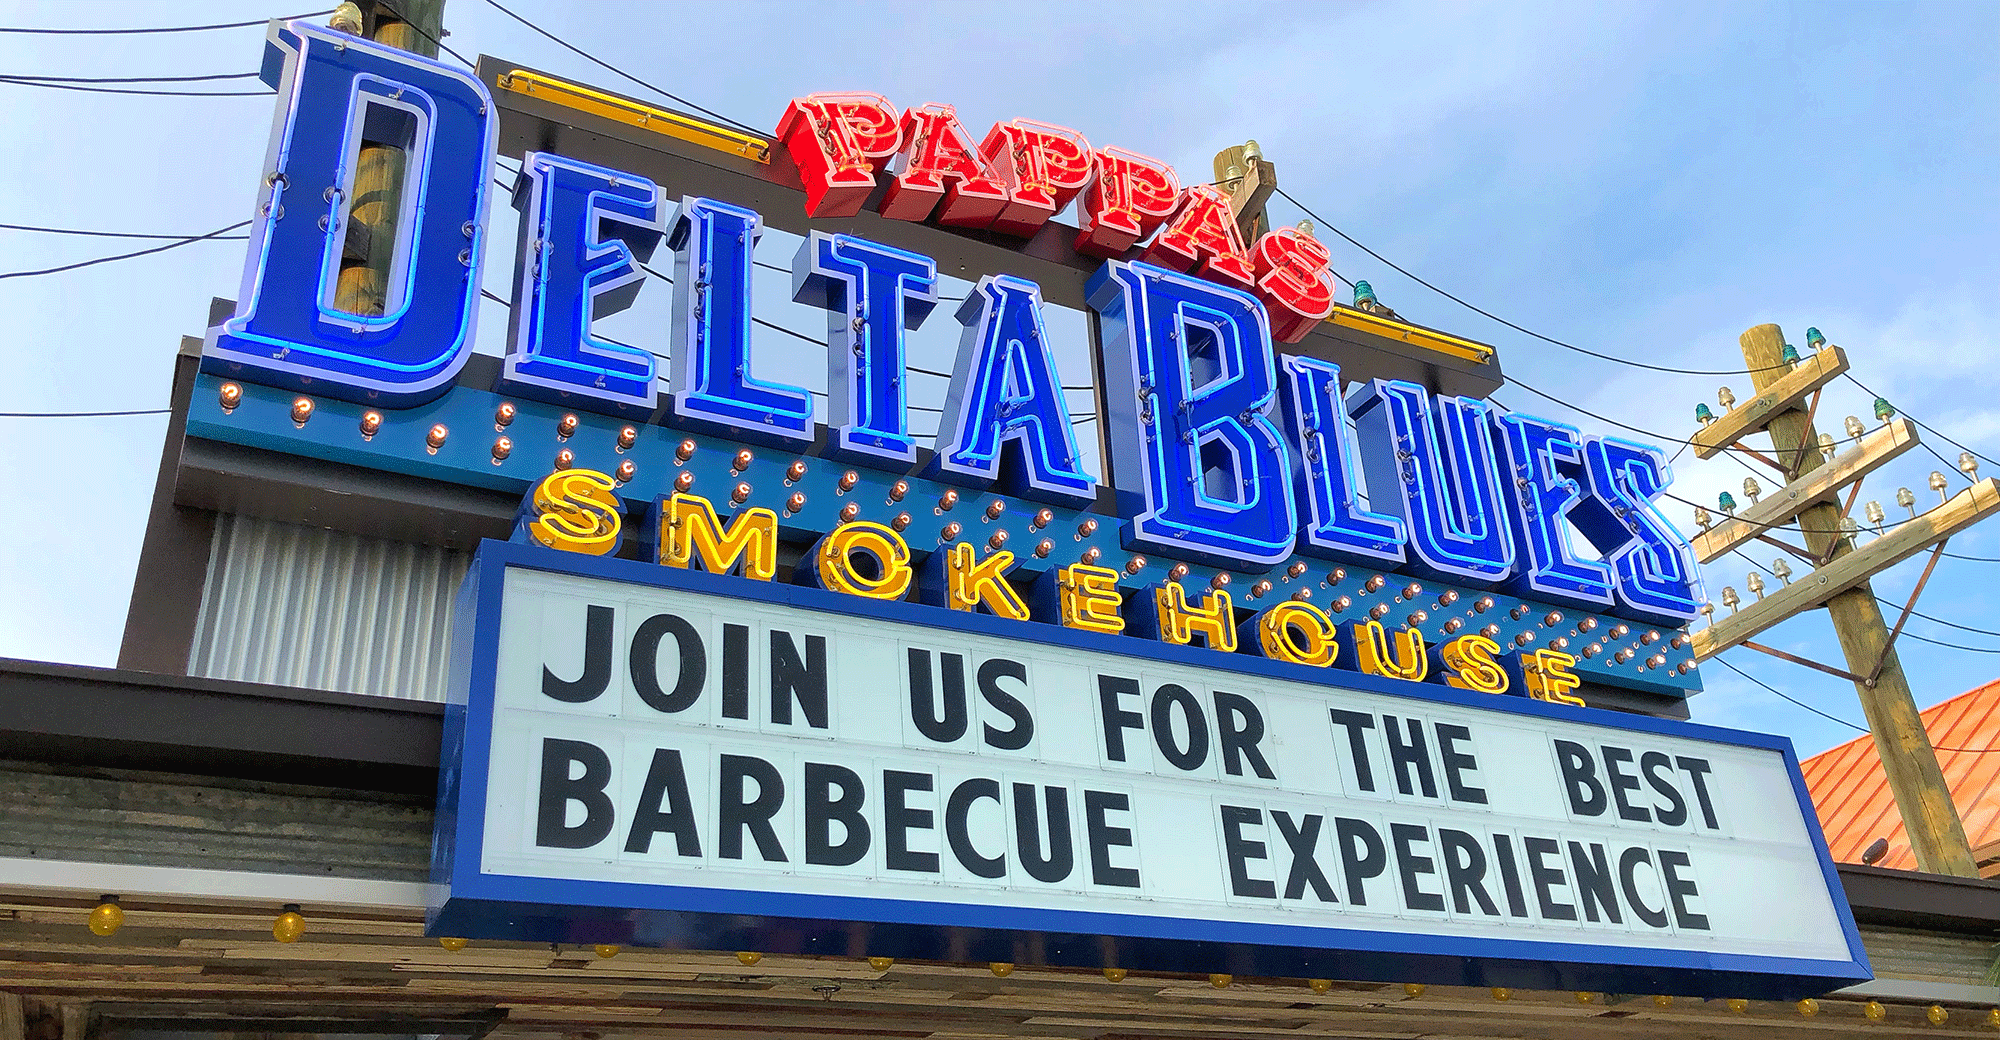 Pappas Delta Blues - An Elevated BBQ Experience